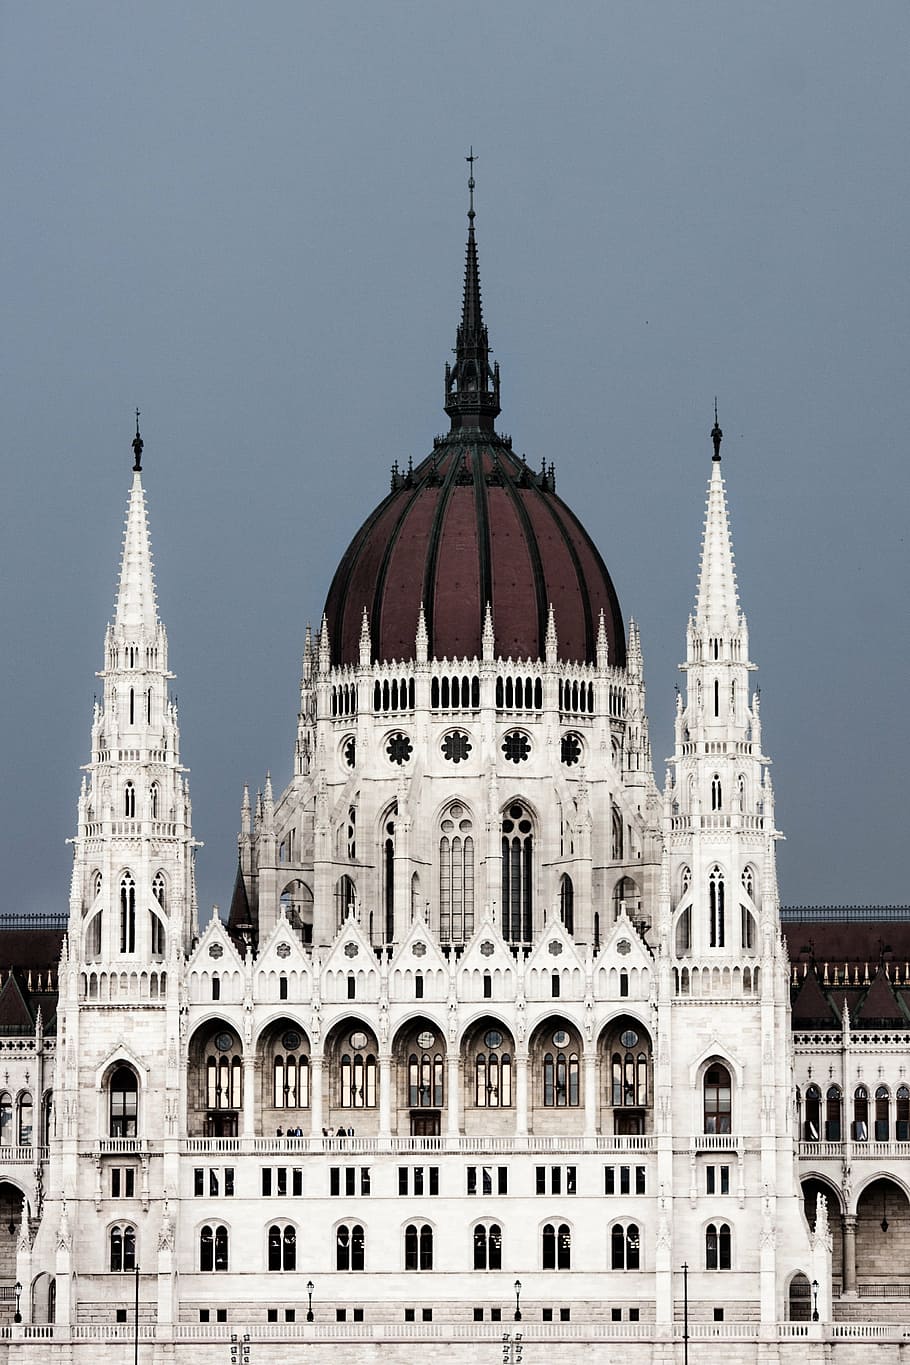 white, red, building, architecture, infrastructure, structure, establishment, sky, hungarian, parliament